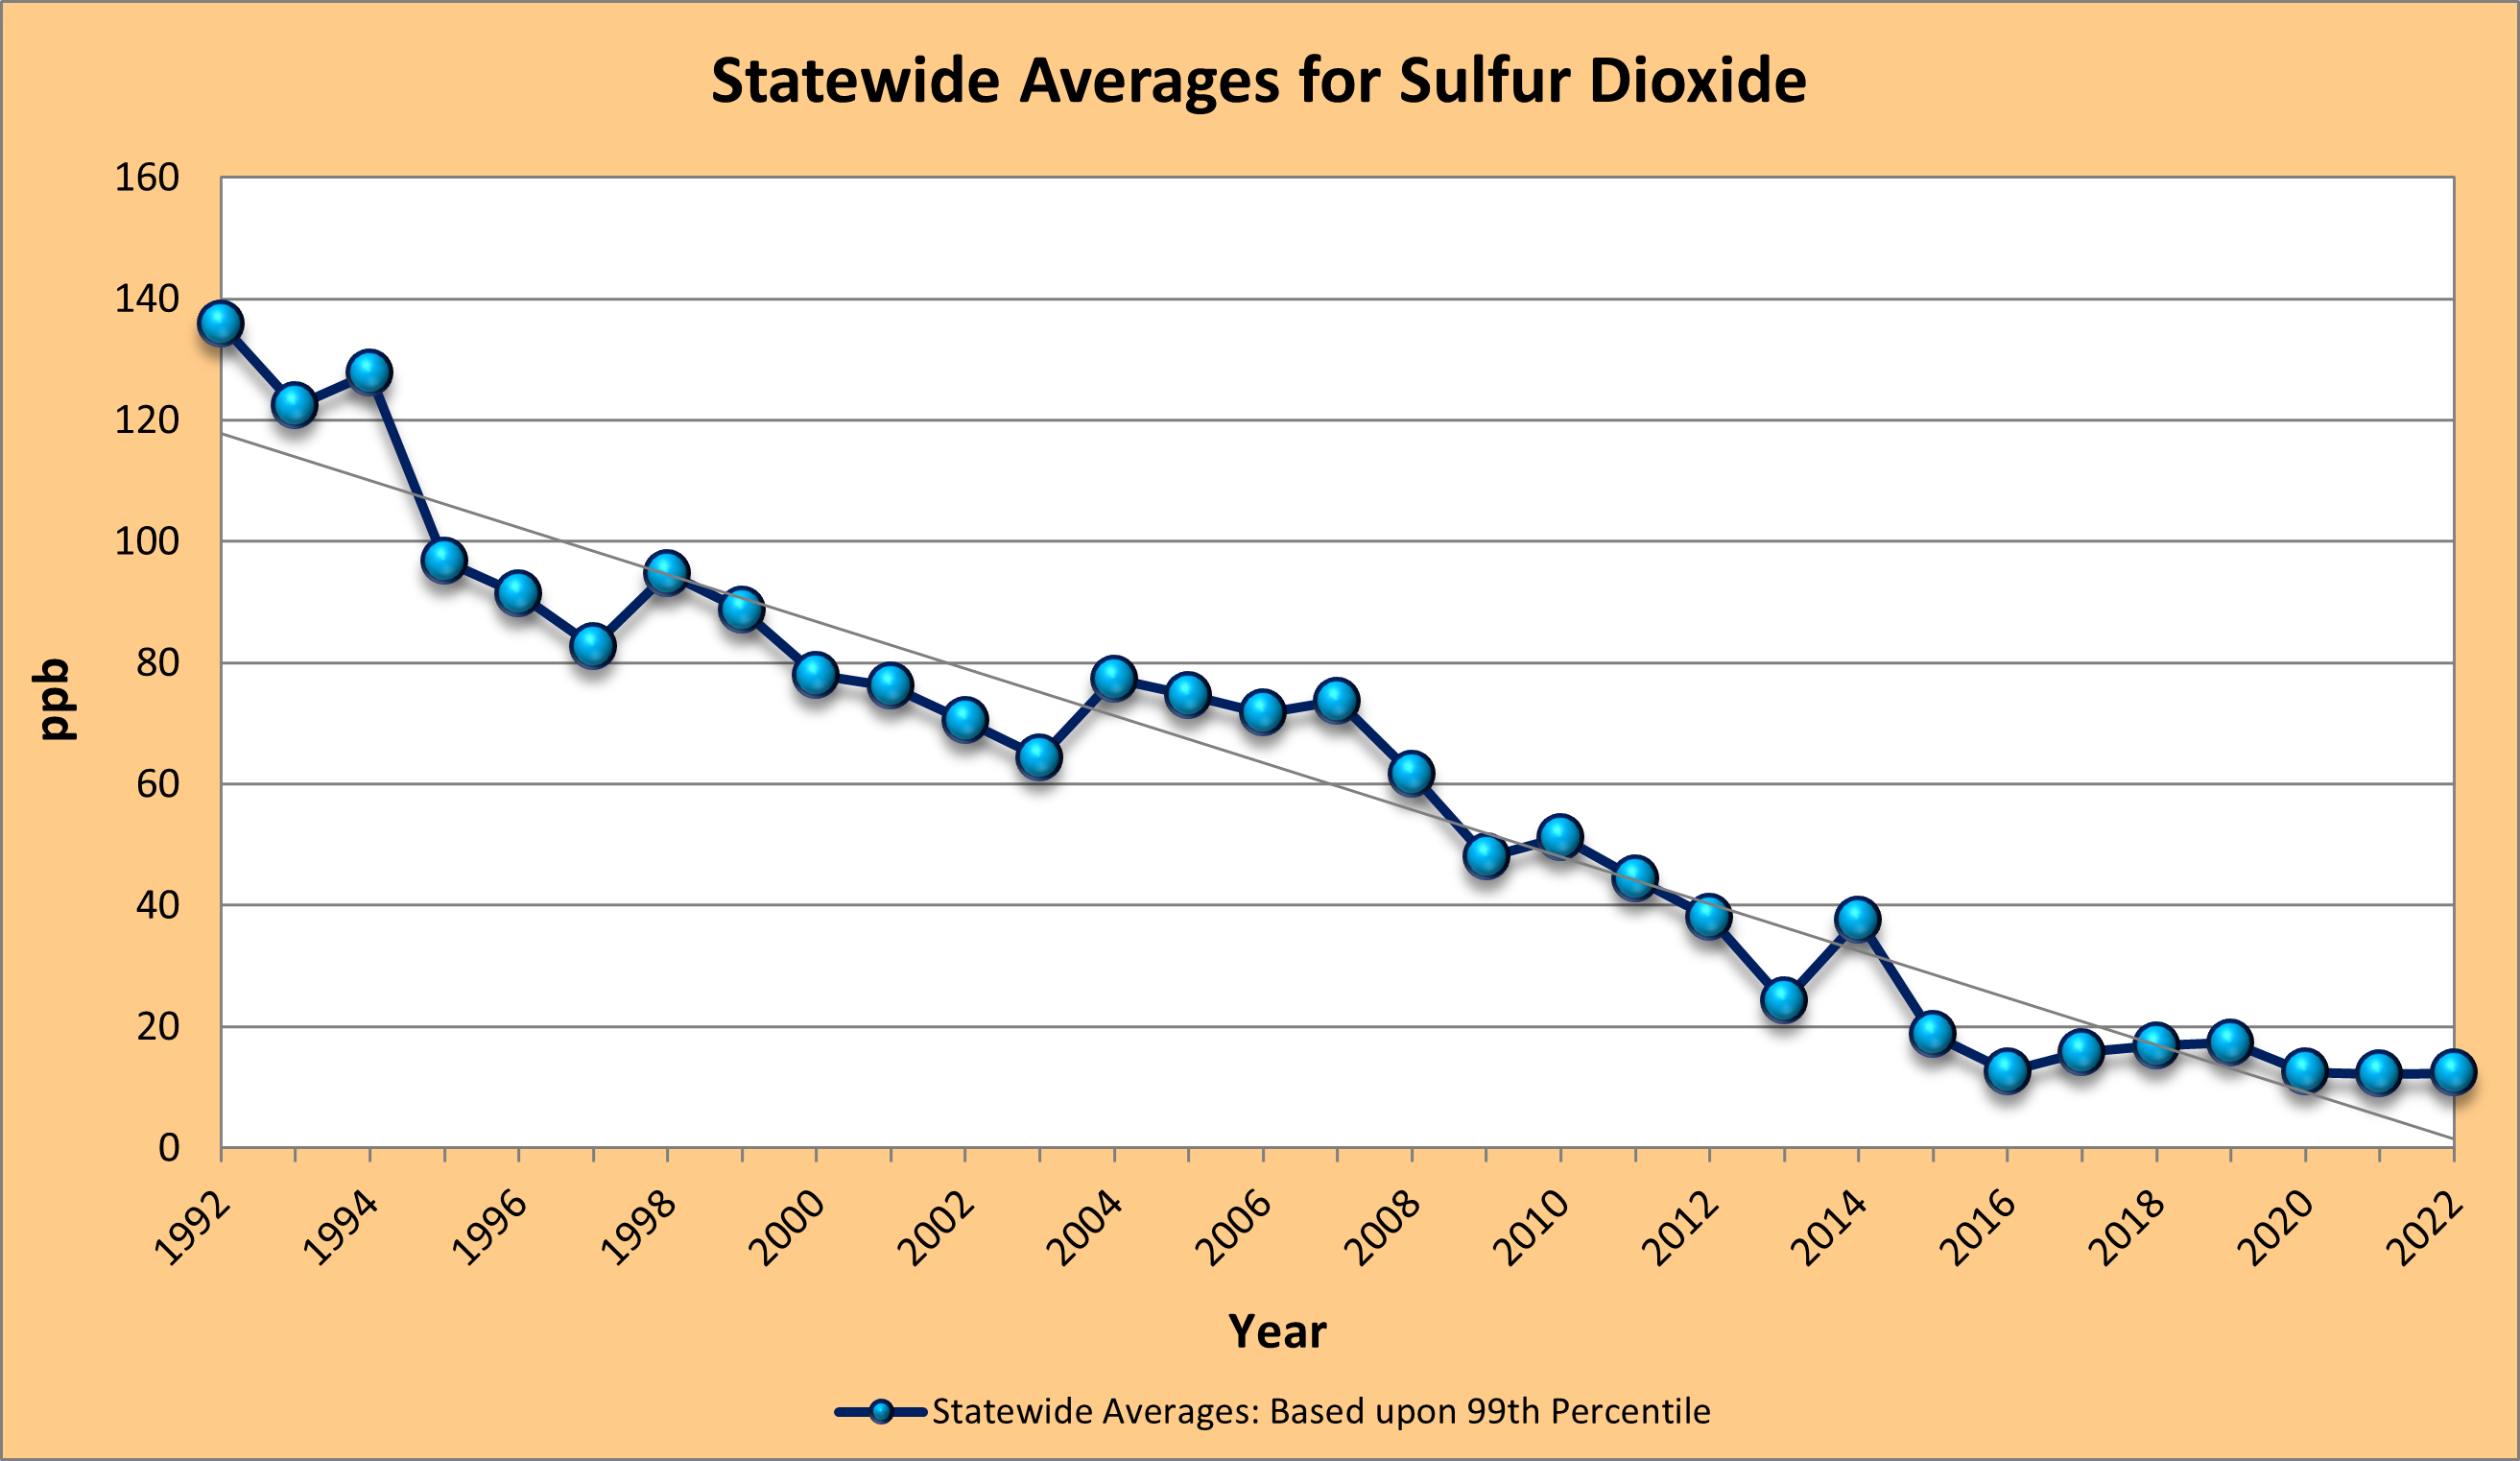 Ambient air monitoring data for sulfur dioxide averaged across the state.